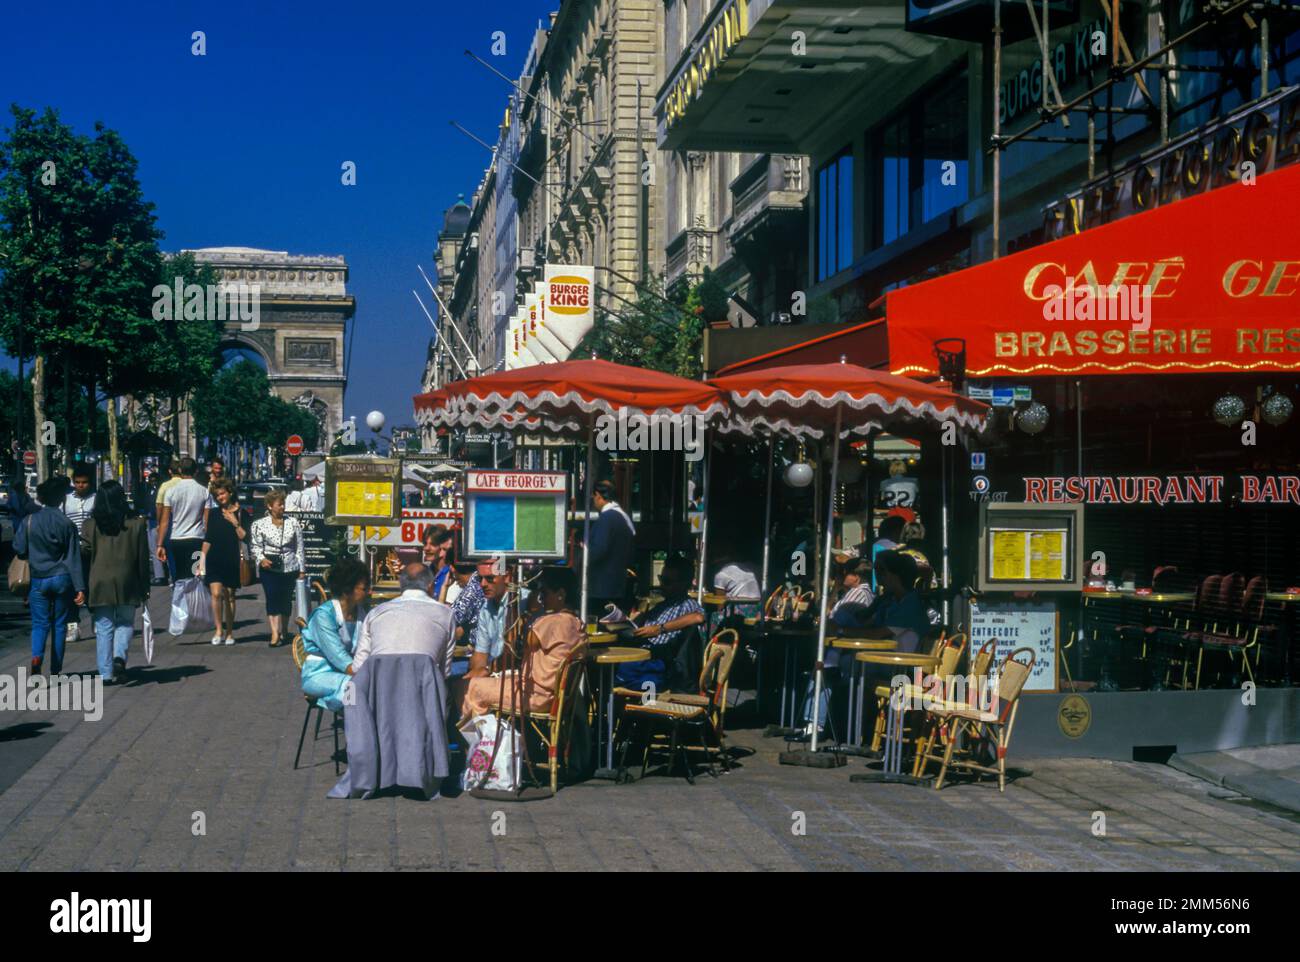 1987 HISTORICAL STREET SCENE OUTDOOR CAFE CHAMPS ELYSEES PARIS FRANCE Stock Photo